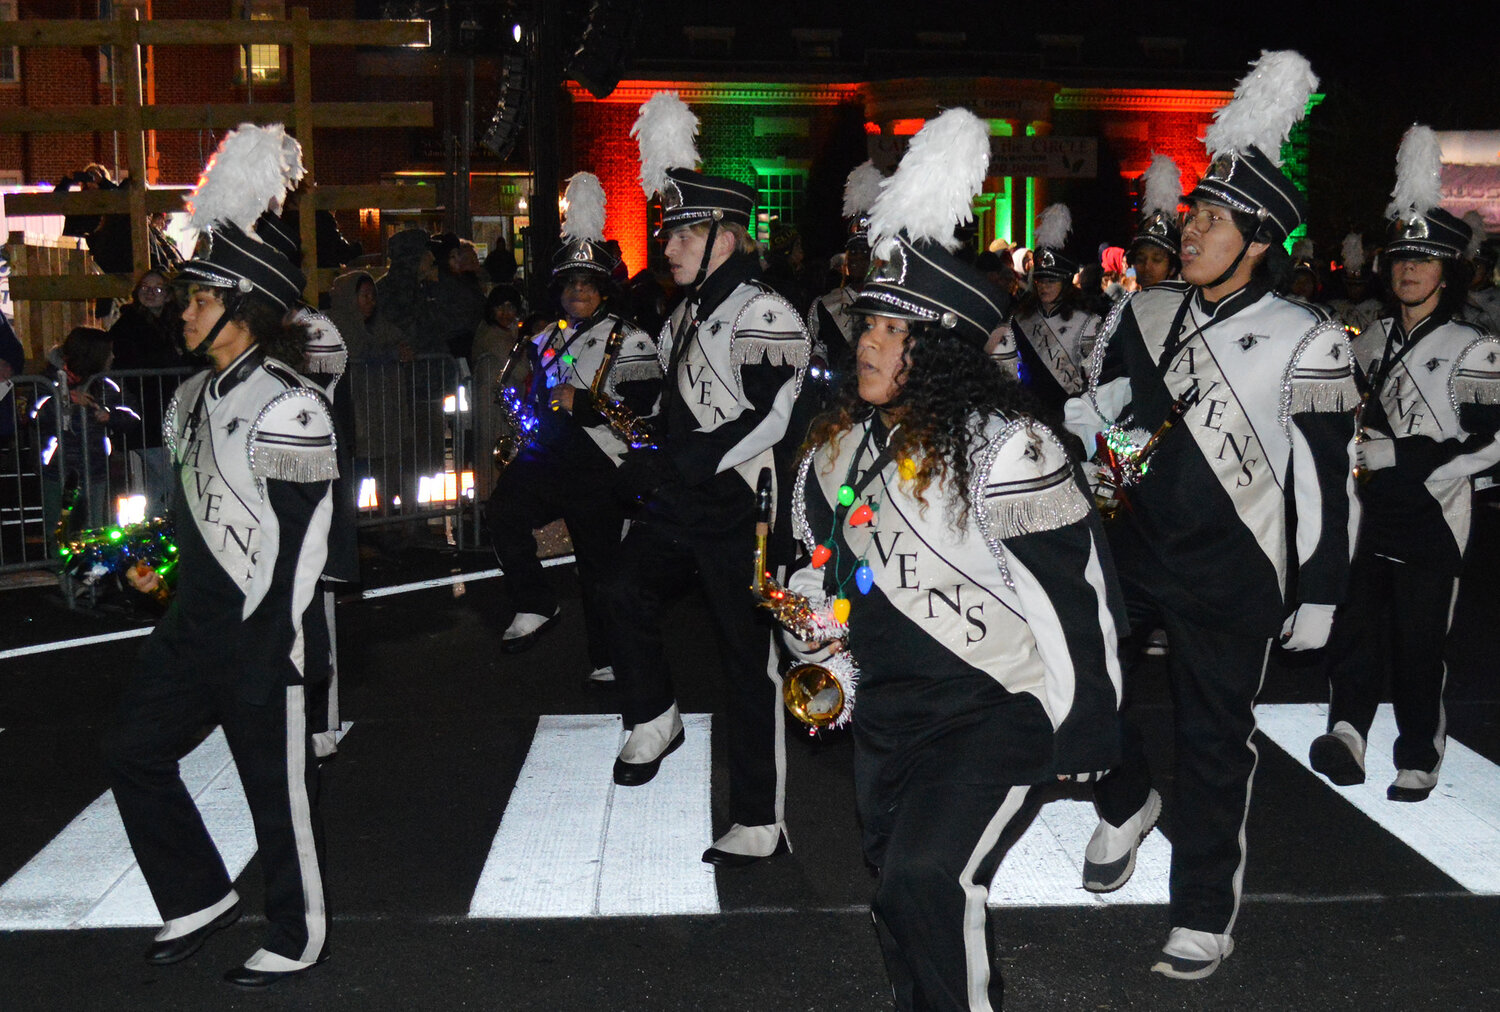 Sussex Technical High School's Raven Nation marching band high-steps through The Circle during the Georgetown Christmas Parade on Thursday.